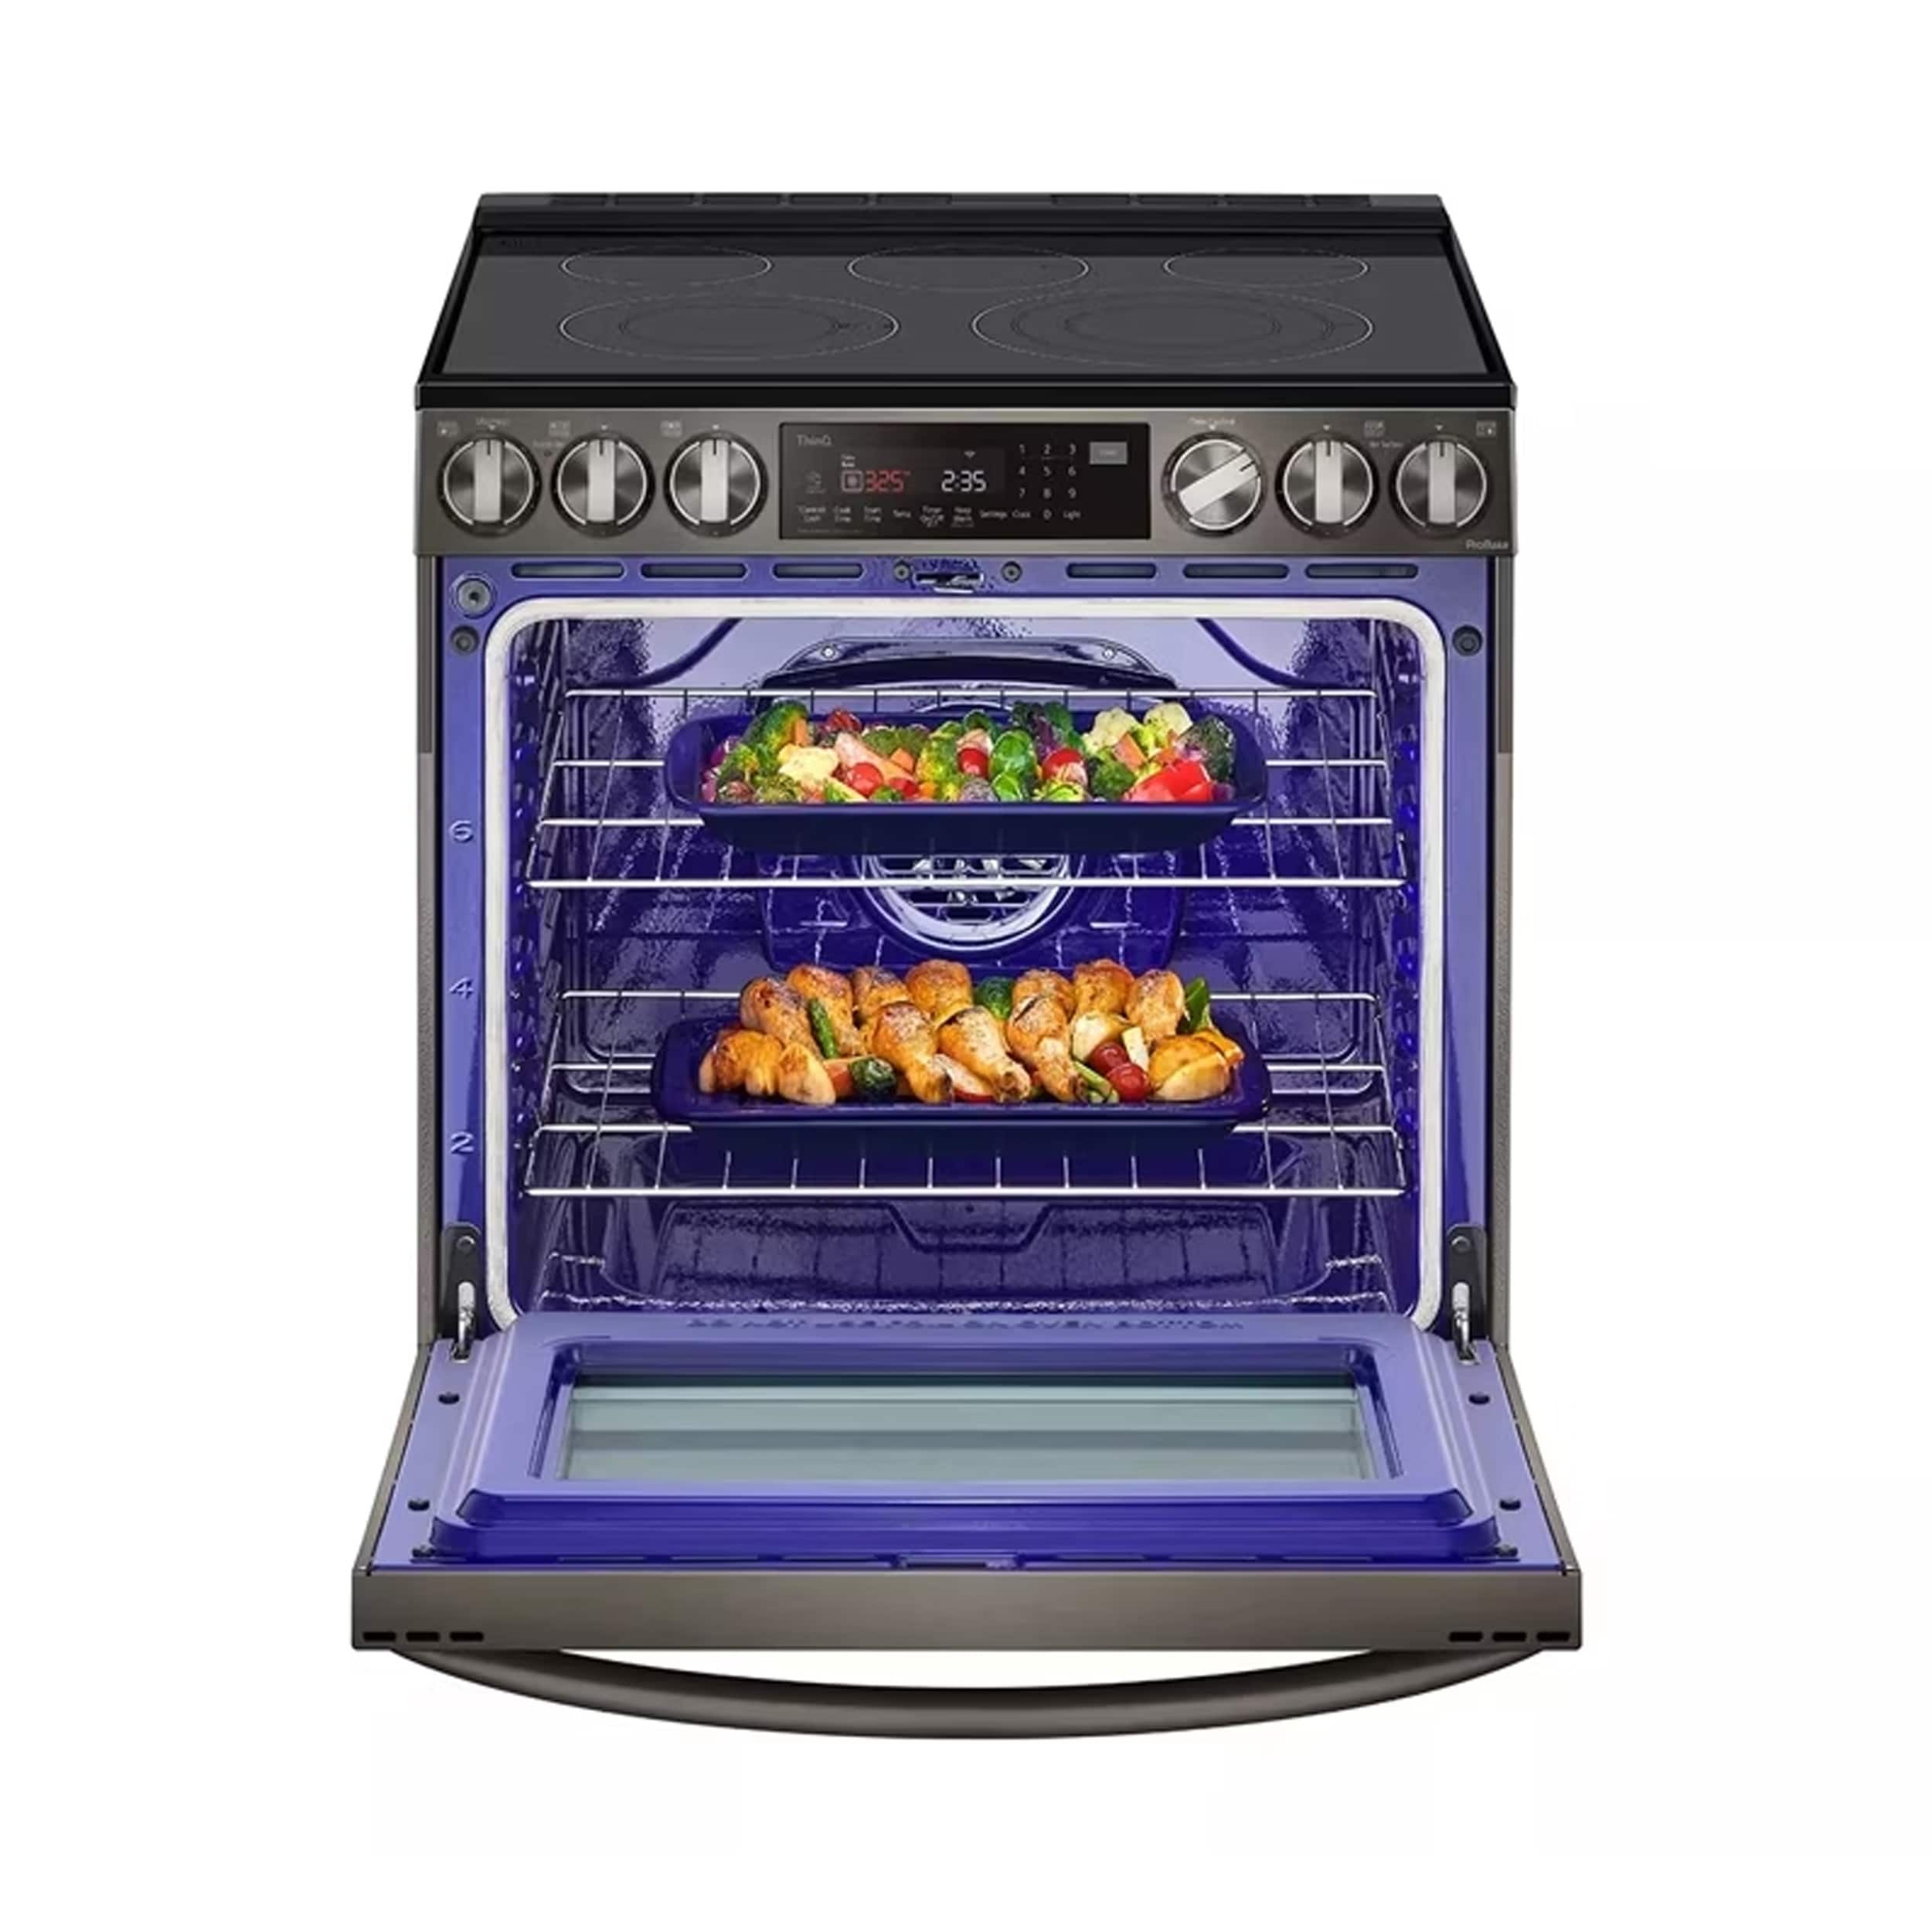 LG 6.3 cu ft. Smart wi-fi Enabled ProBake Convection InstaView Electric Slide-In Range with Air Fry